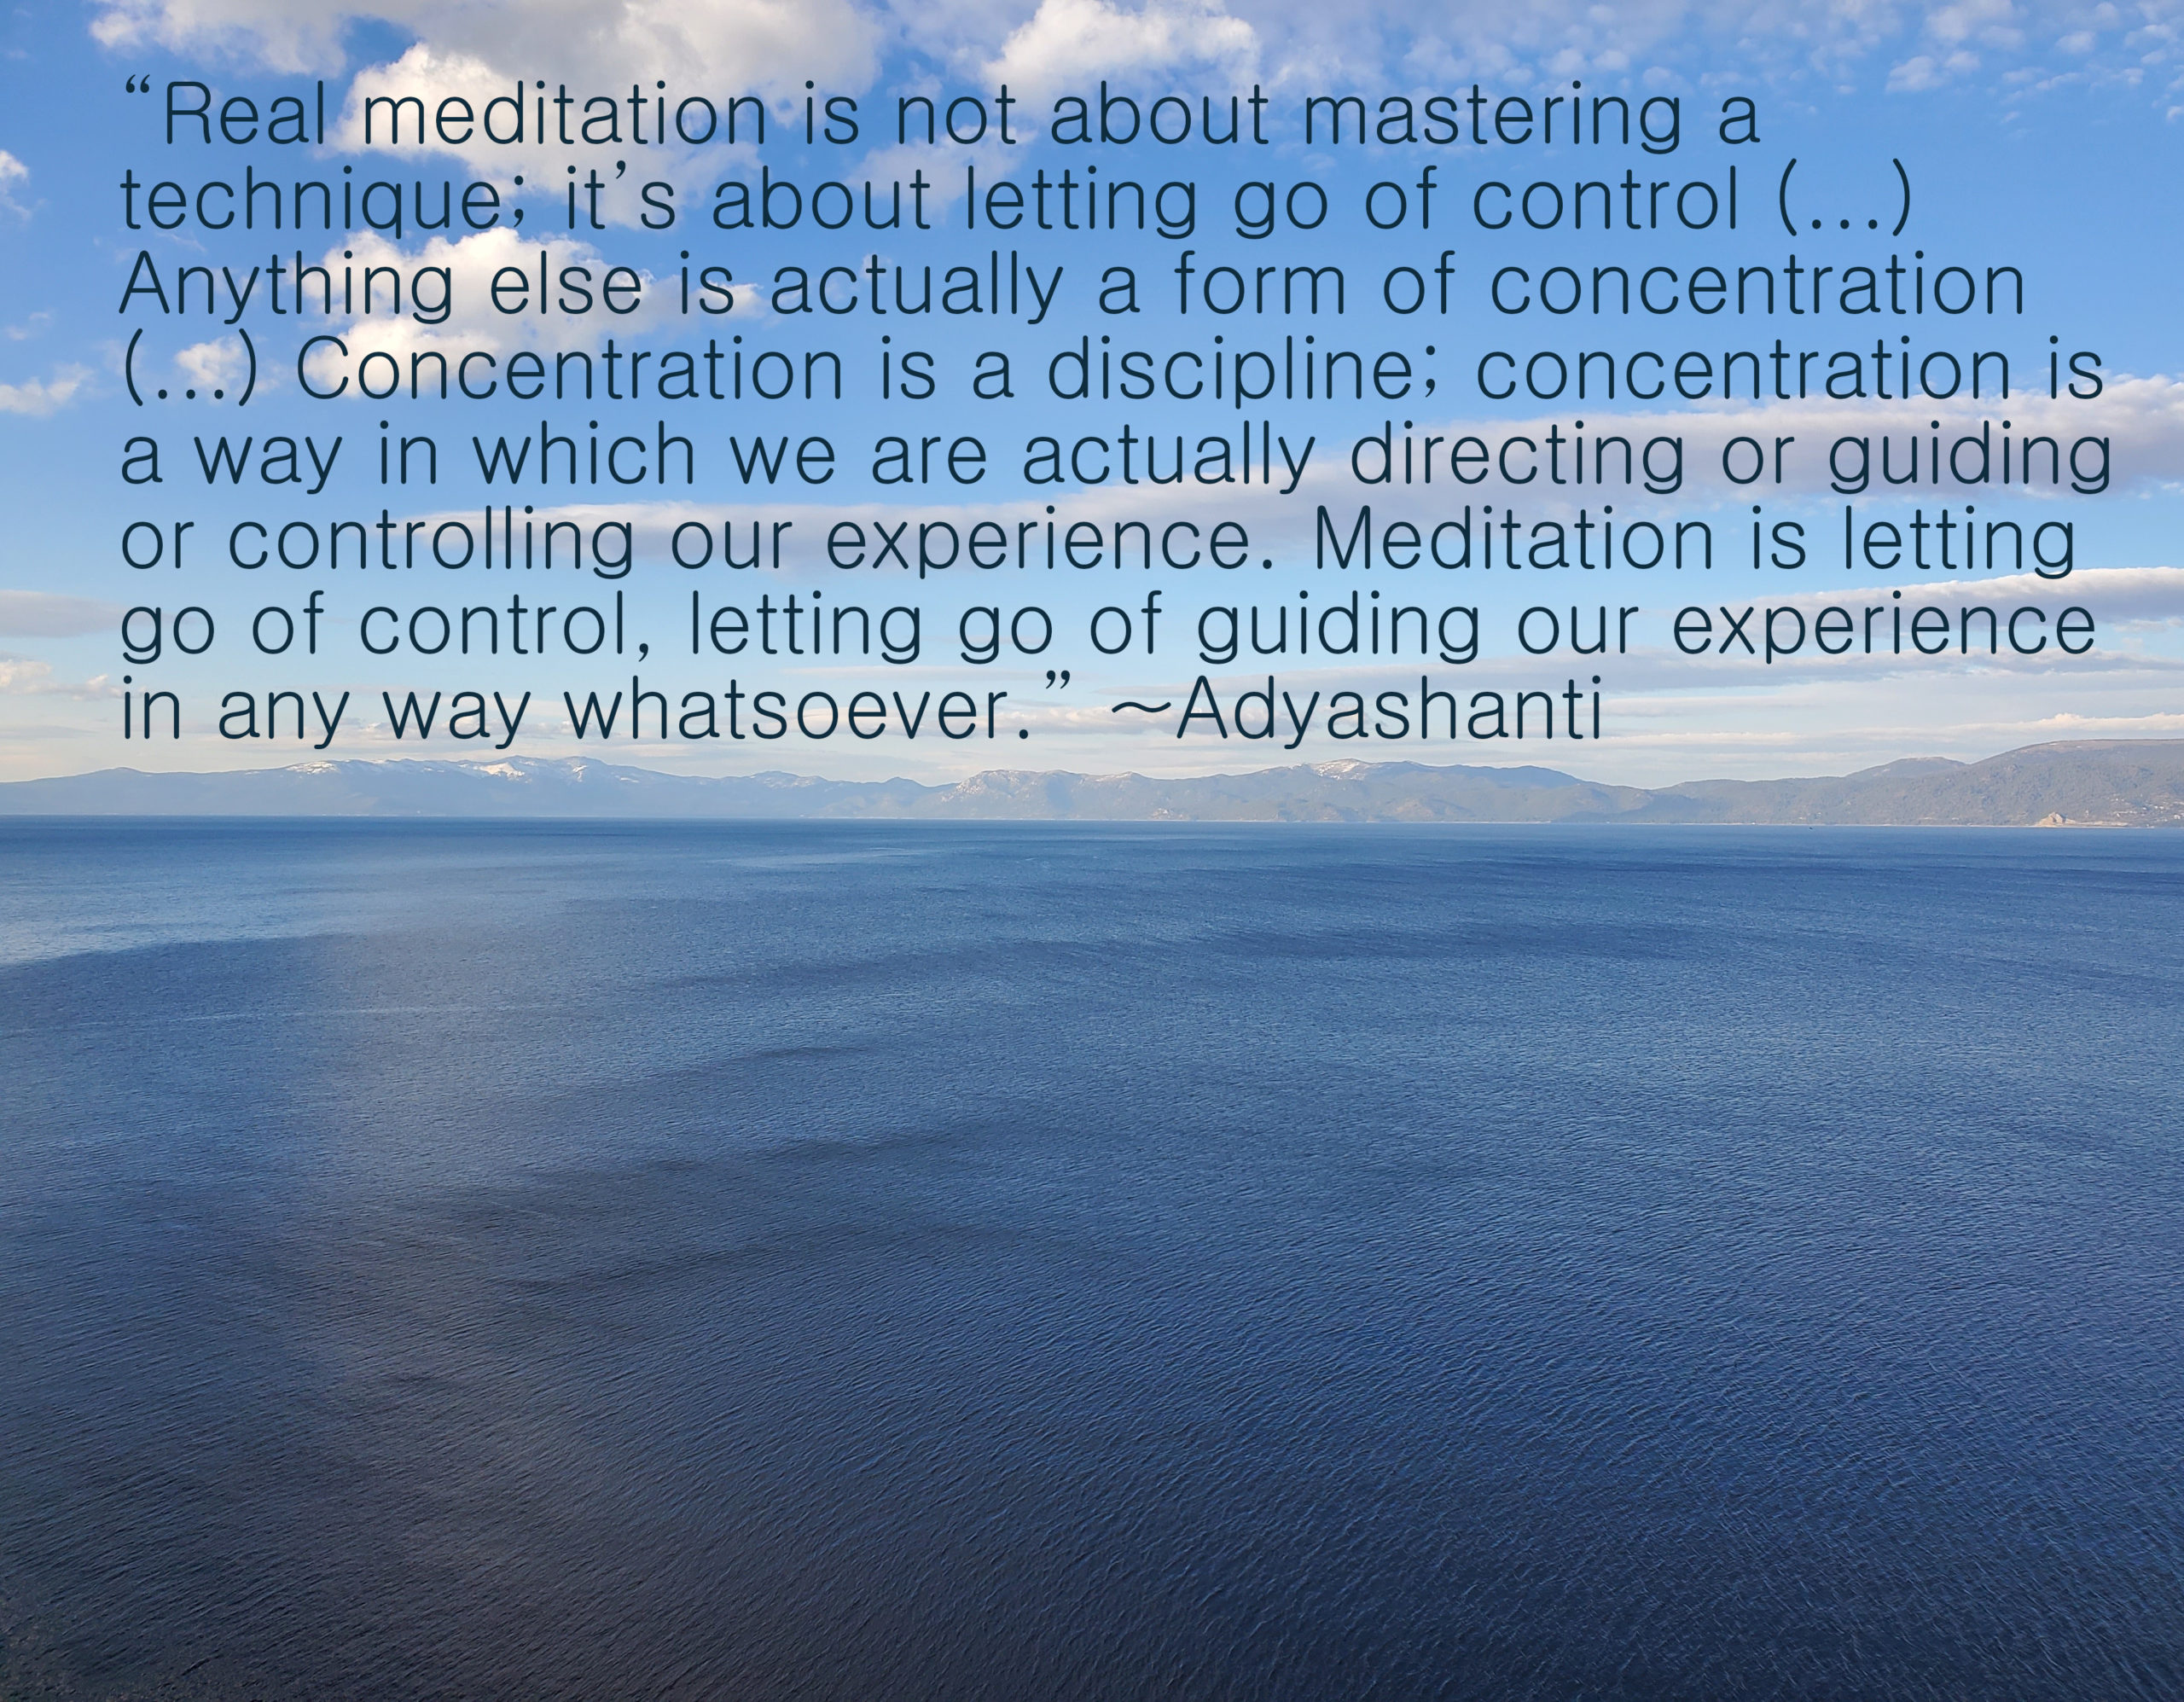 You are currently viewing Resources for starting or broadening your meditation practice